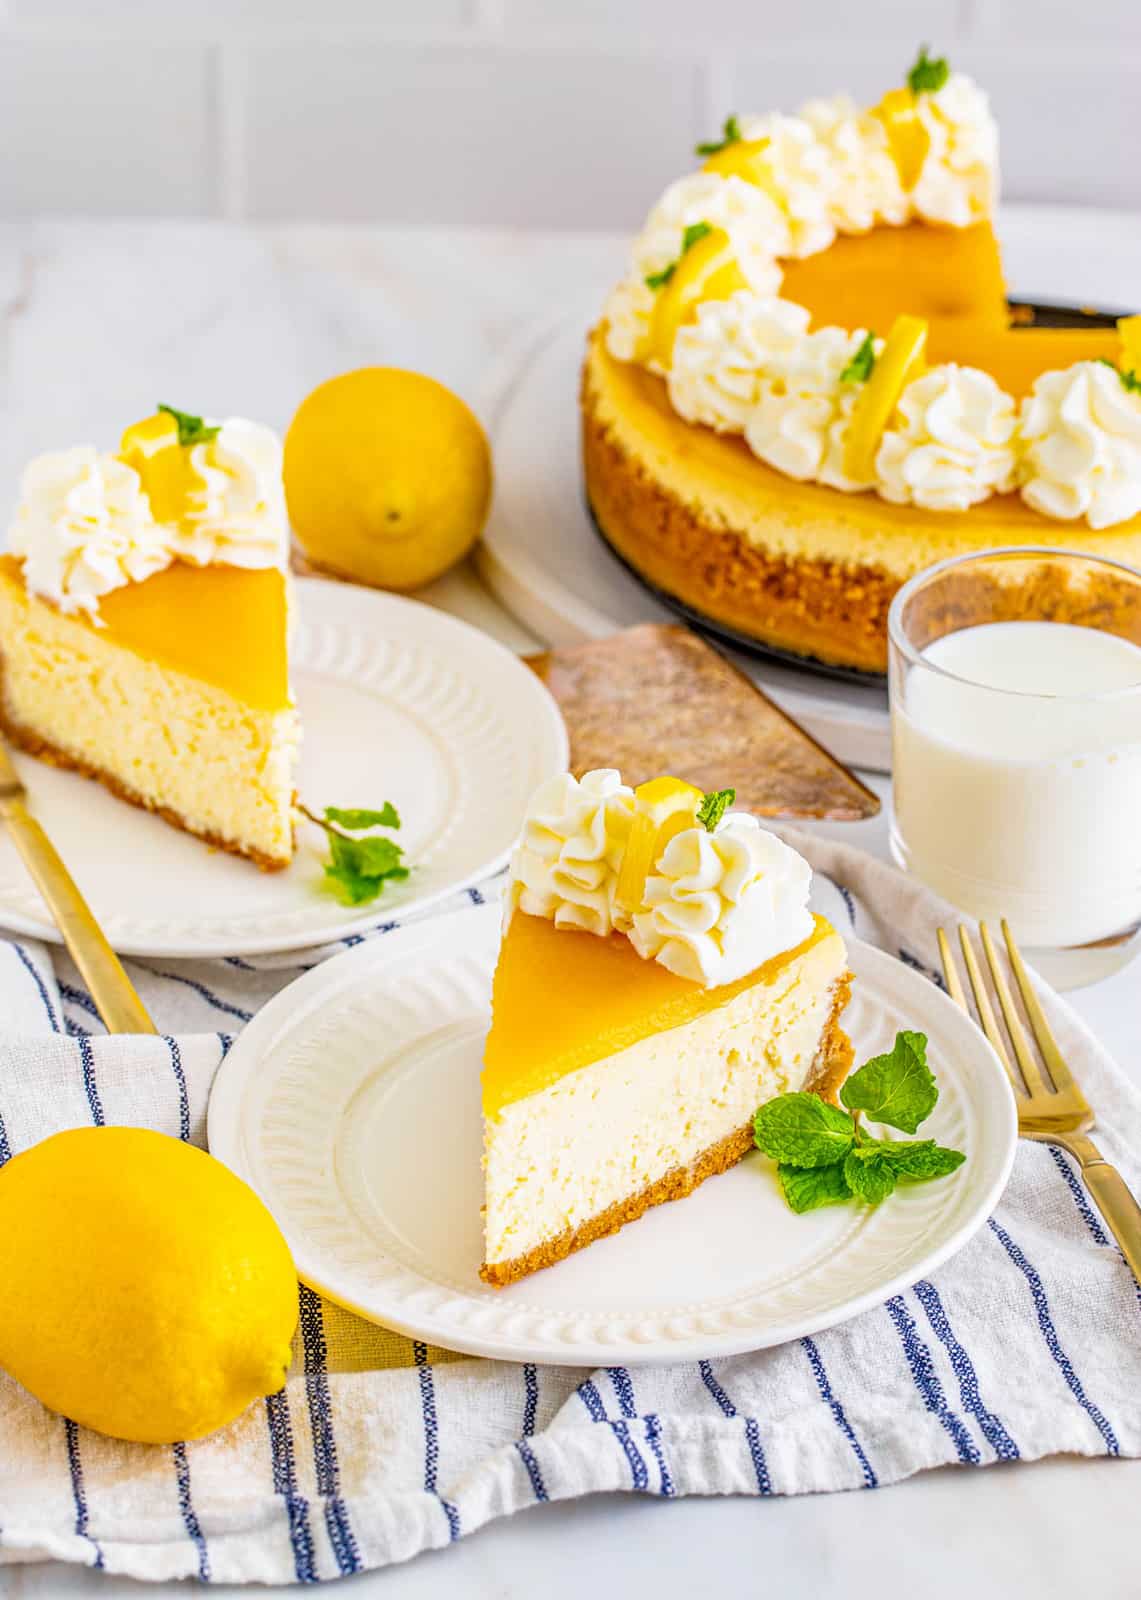 Two slices of cheesecake on white plates garnished with lemon and milk in background.